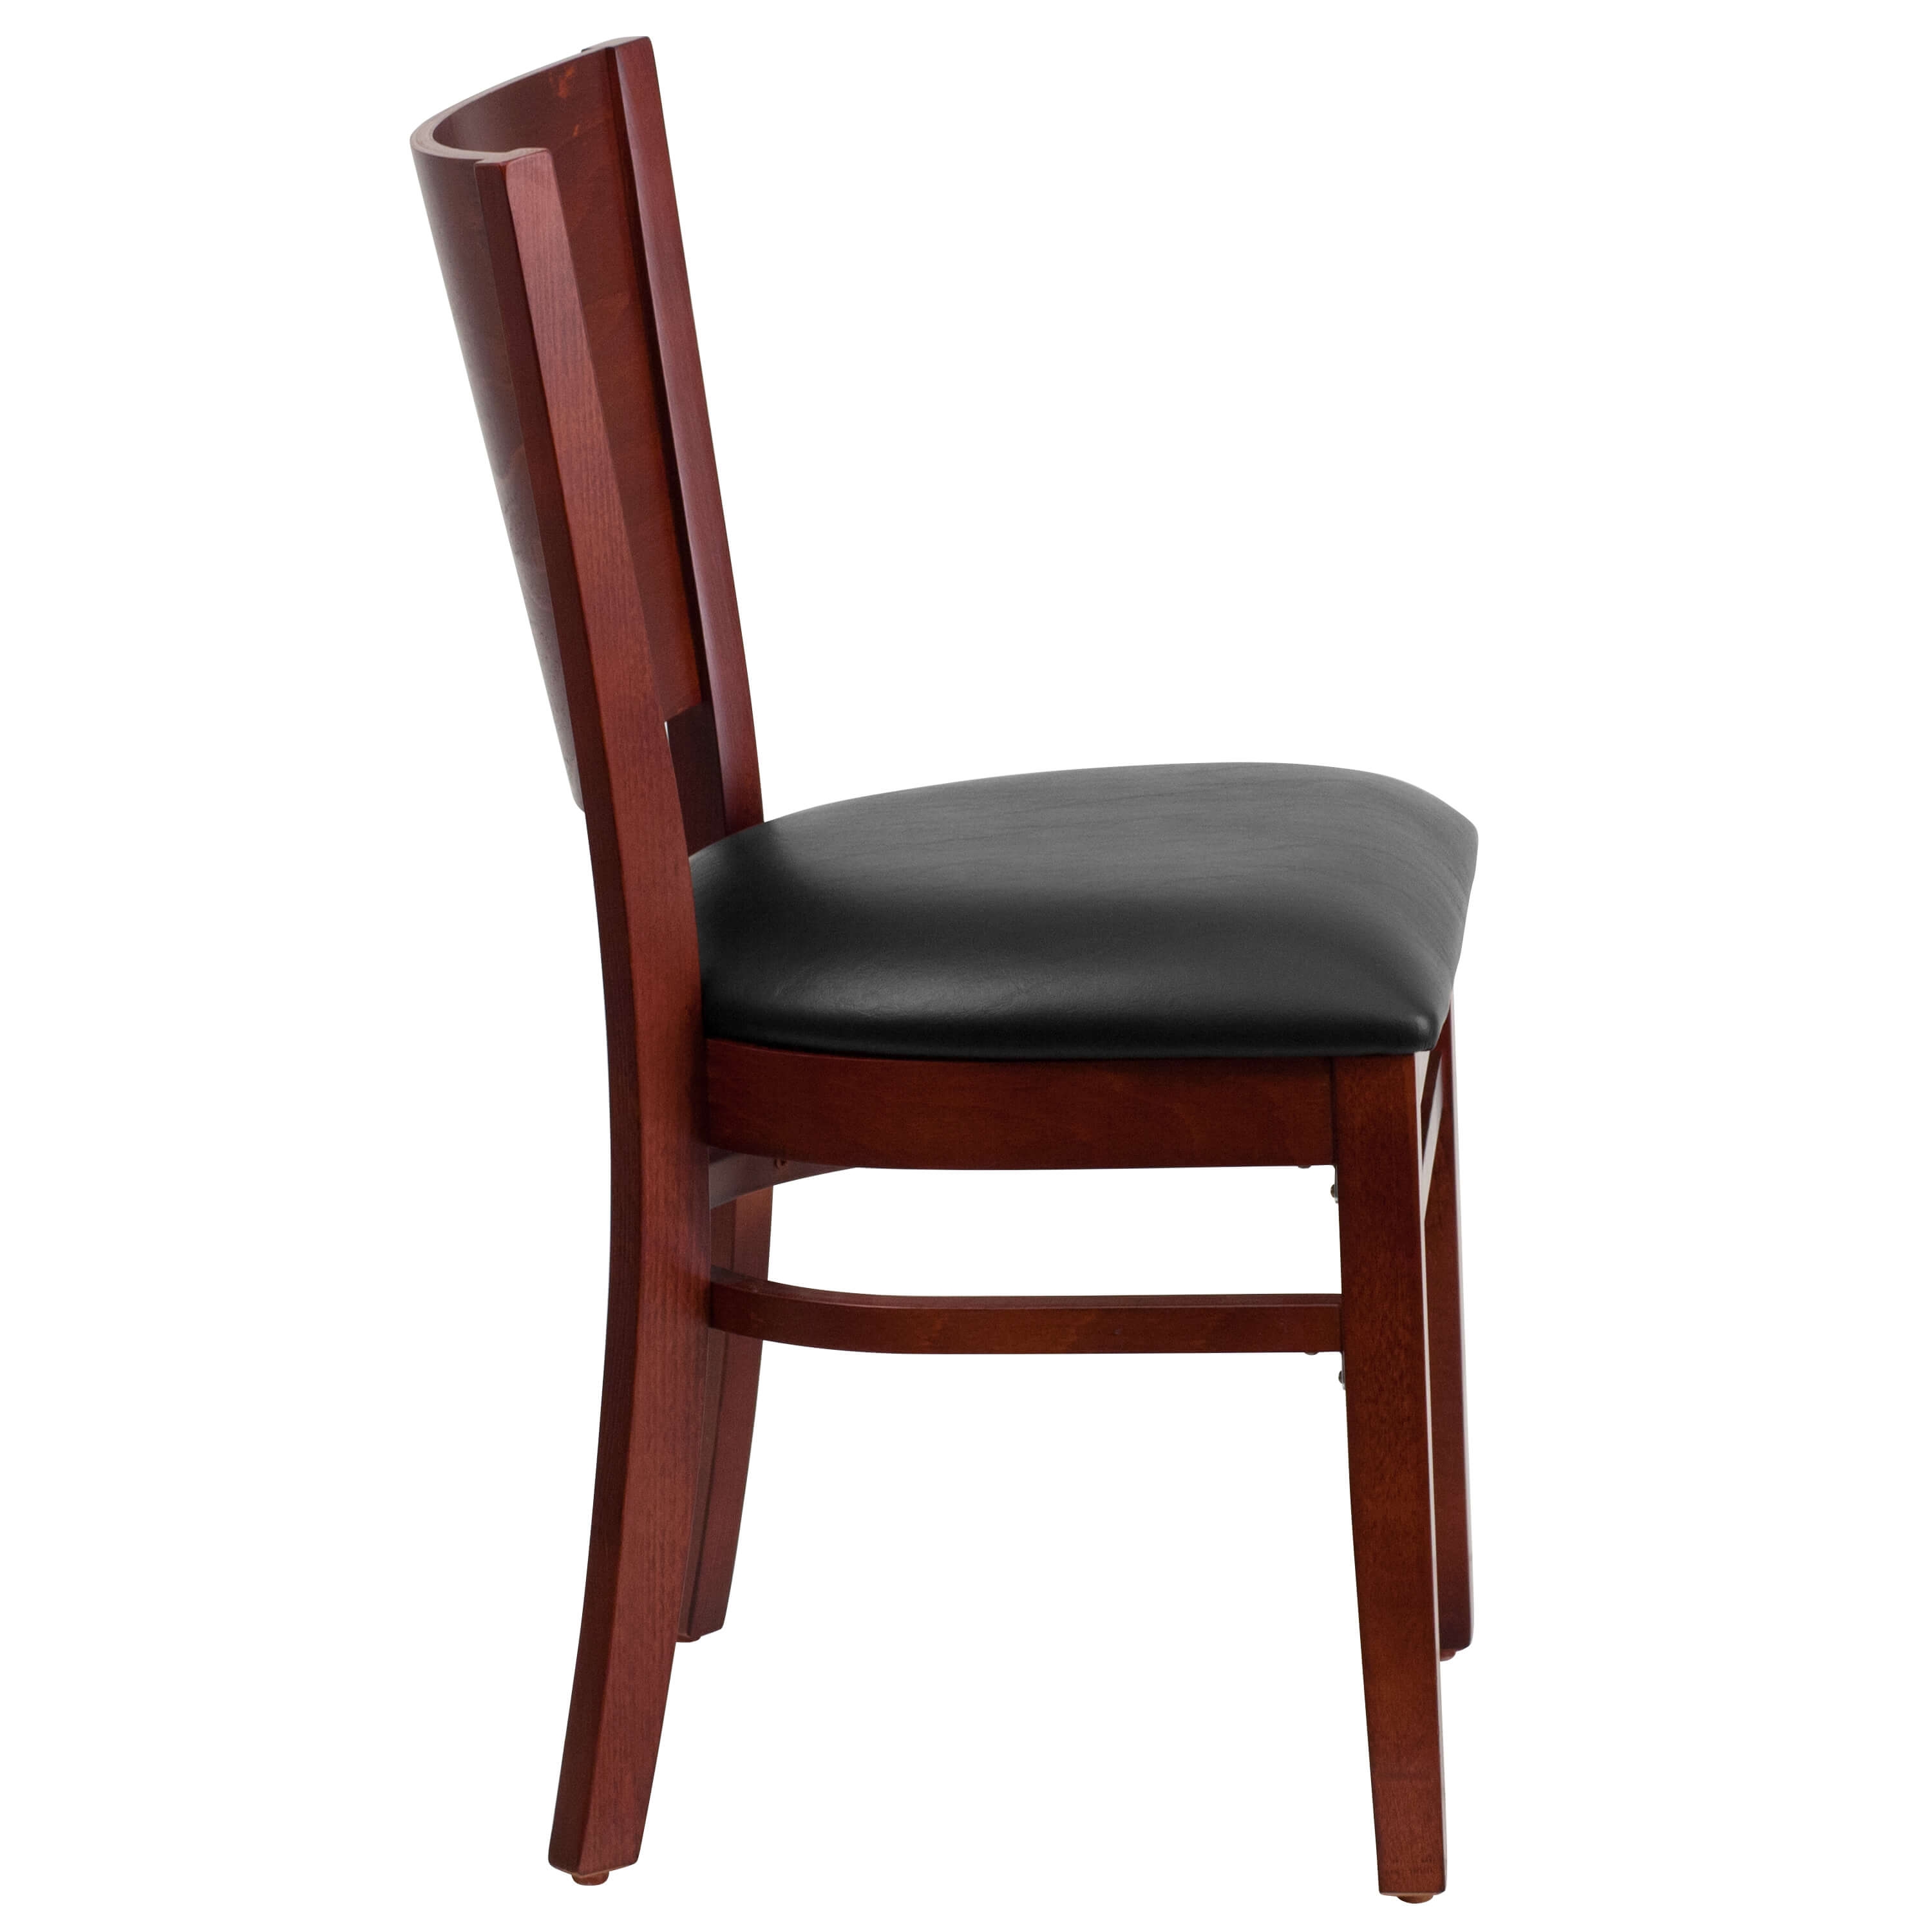 Solid wood dining chairs side view